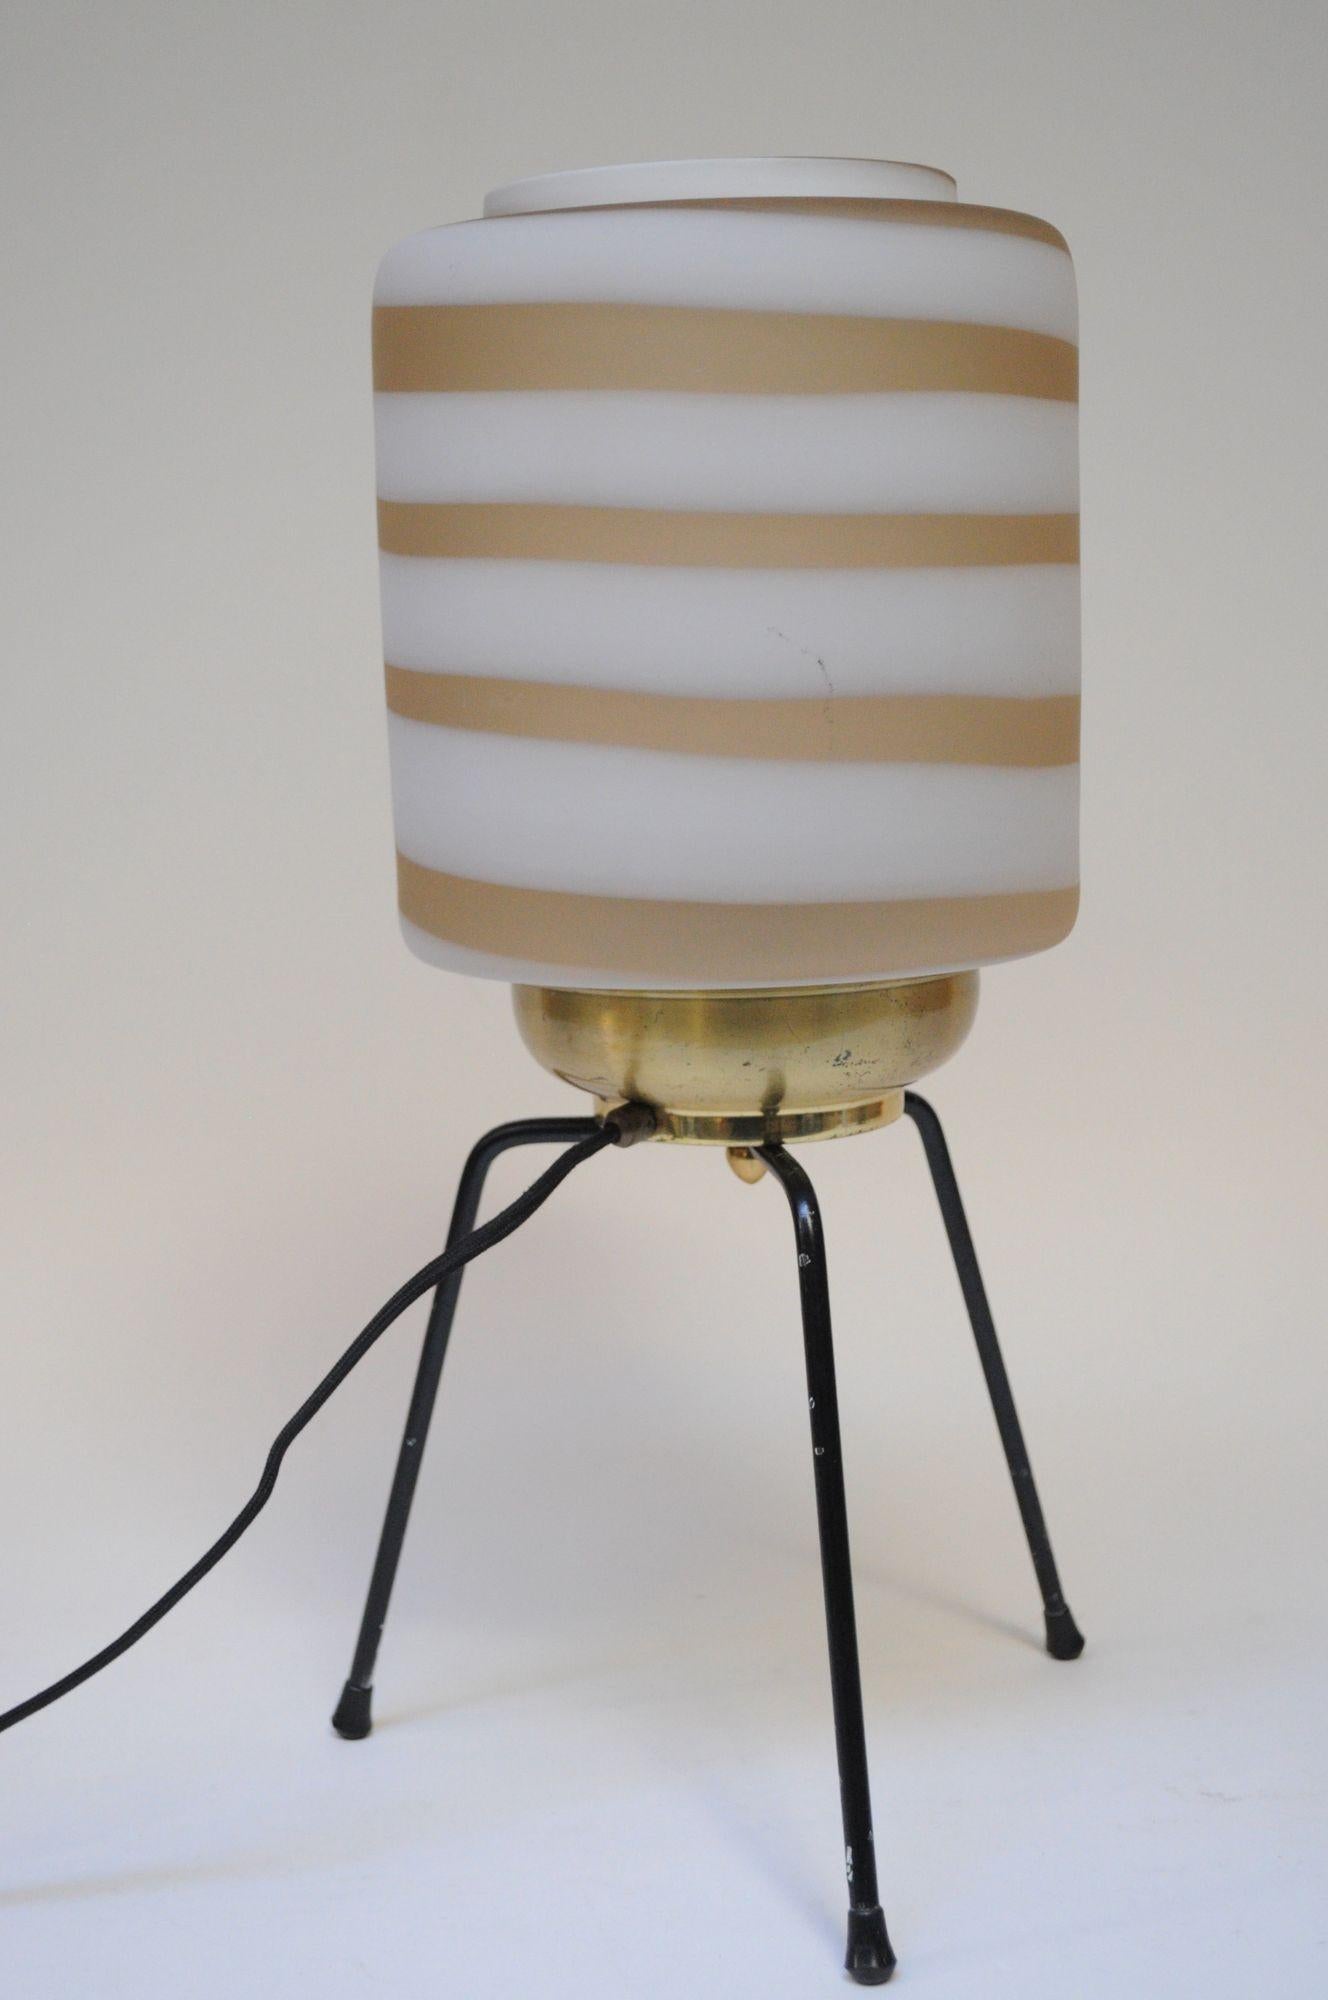 Impressive table lamp composed of a rubber/plastic tripod base supporting a brass cradle with Murano glass shade (ca. 1950s, Italy).
Frosted cylindrical glass shade is a swirl of taupe-beige against white and emits a warm, potent light.
Overall,